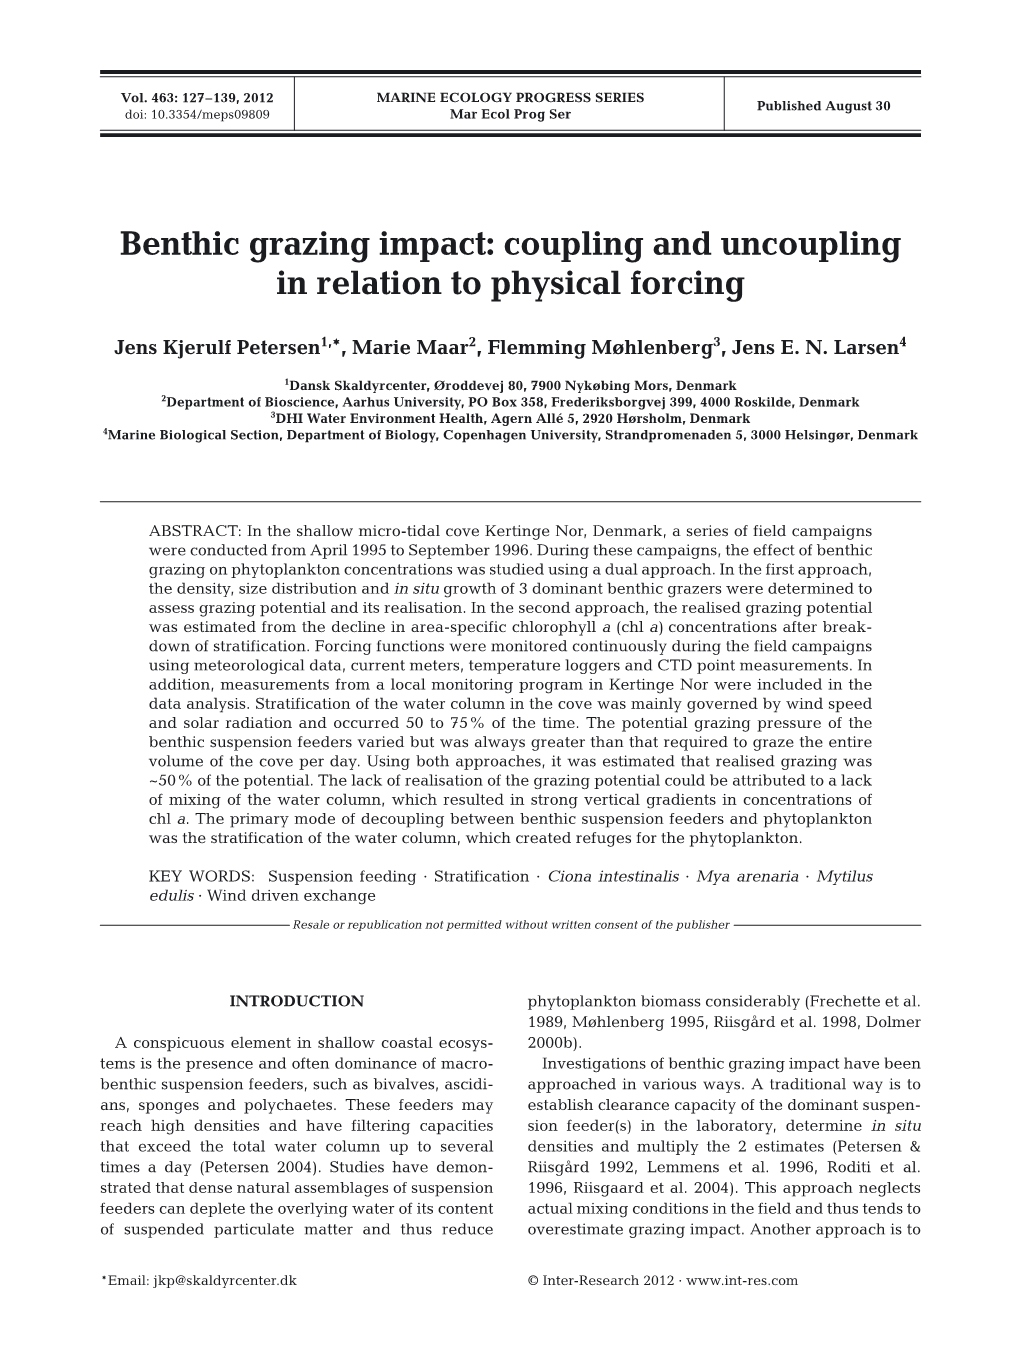 Benthic Grazing Impact: Coupling and Uncoupling in Relation to Physical Forcing